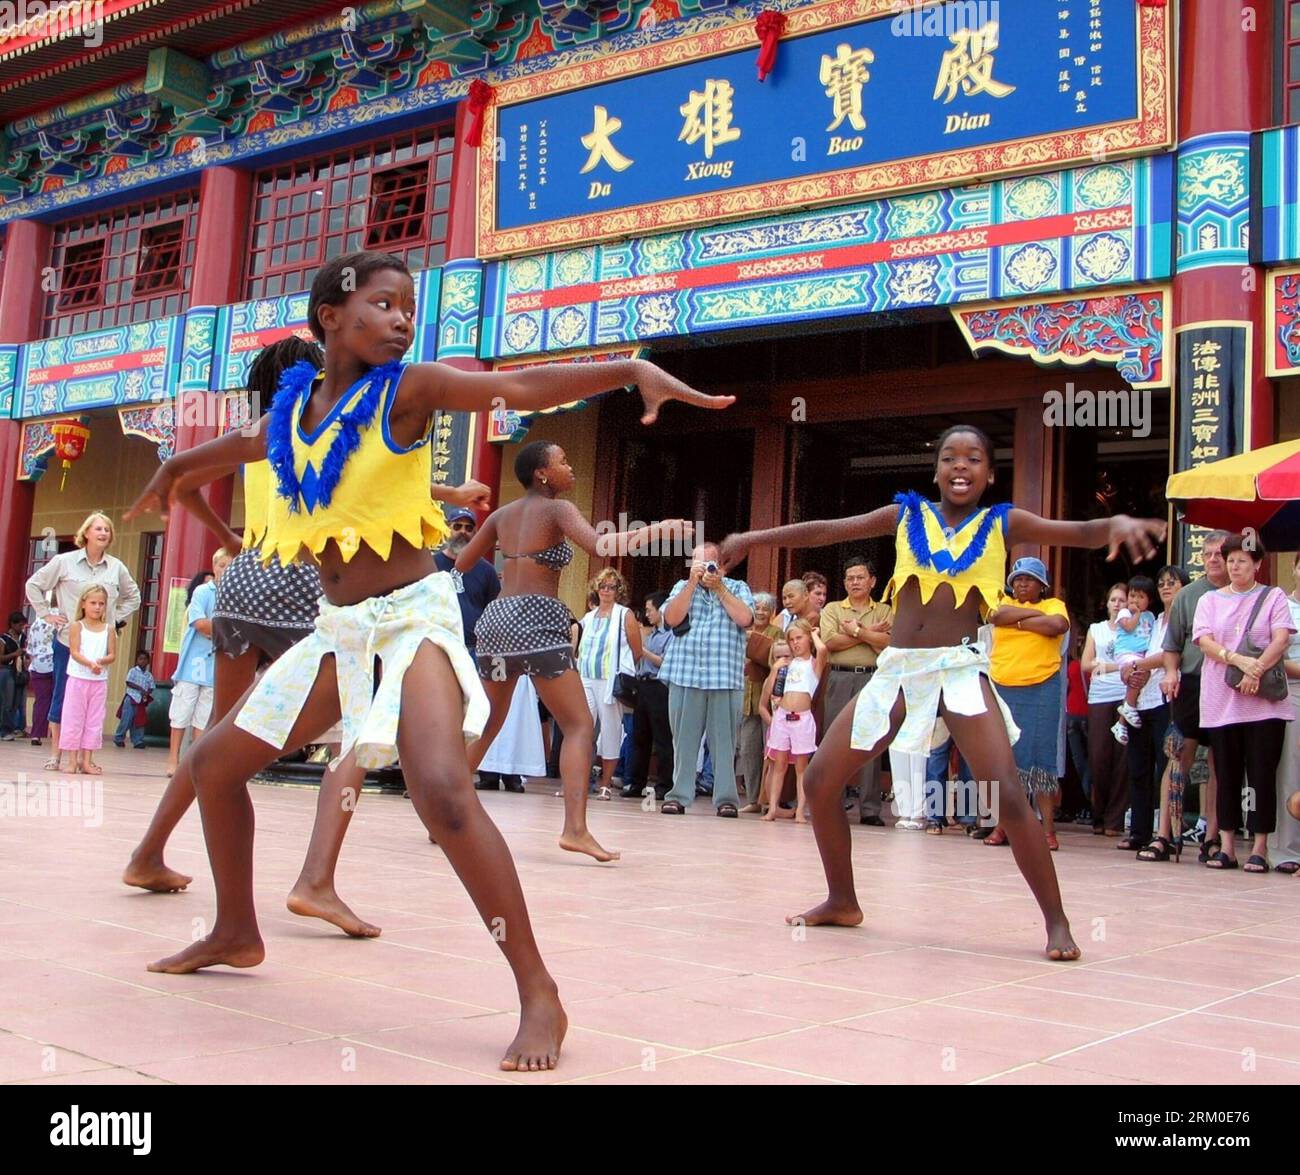 Bildnummer: 59379254  Datum: 29.01.2006  Copyright: imago/Xinhua Local girls dance in front of the Nan Hua Temple, the largest Buddhist temple and seminary in Africa, in Bronkhorstpruit near Johannesburg, South Africa, Jan. 29, 2006. Cultural and people-to-people exchanges have been reinforced between China and African countries over past decades, thus deepening mutual understanding and traditional friendship between the two peoples. Chinese President Xi Jinping will visit Tanzania, South Africa and the Republic of Congo later this month and attend the fifth BRICS summit on March 26-27 in Durb Stock Photo